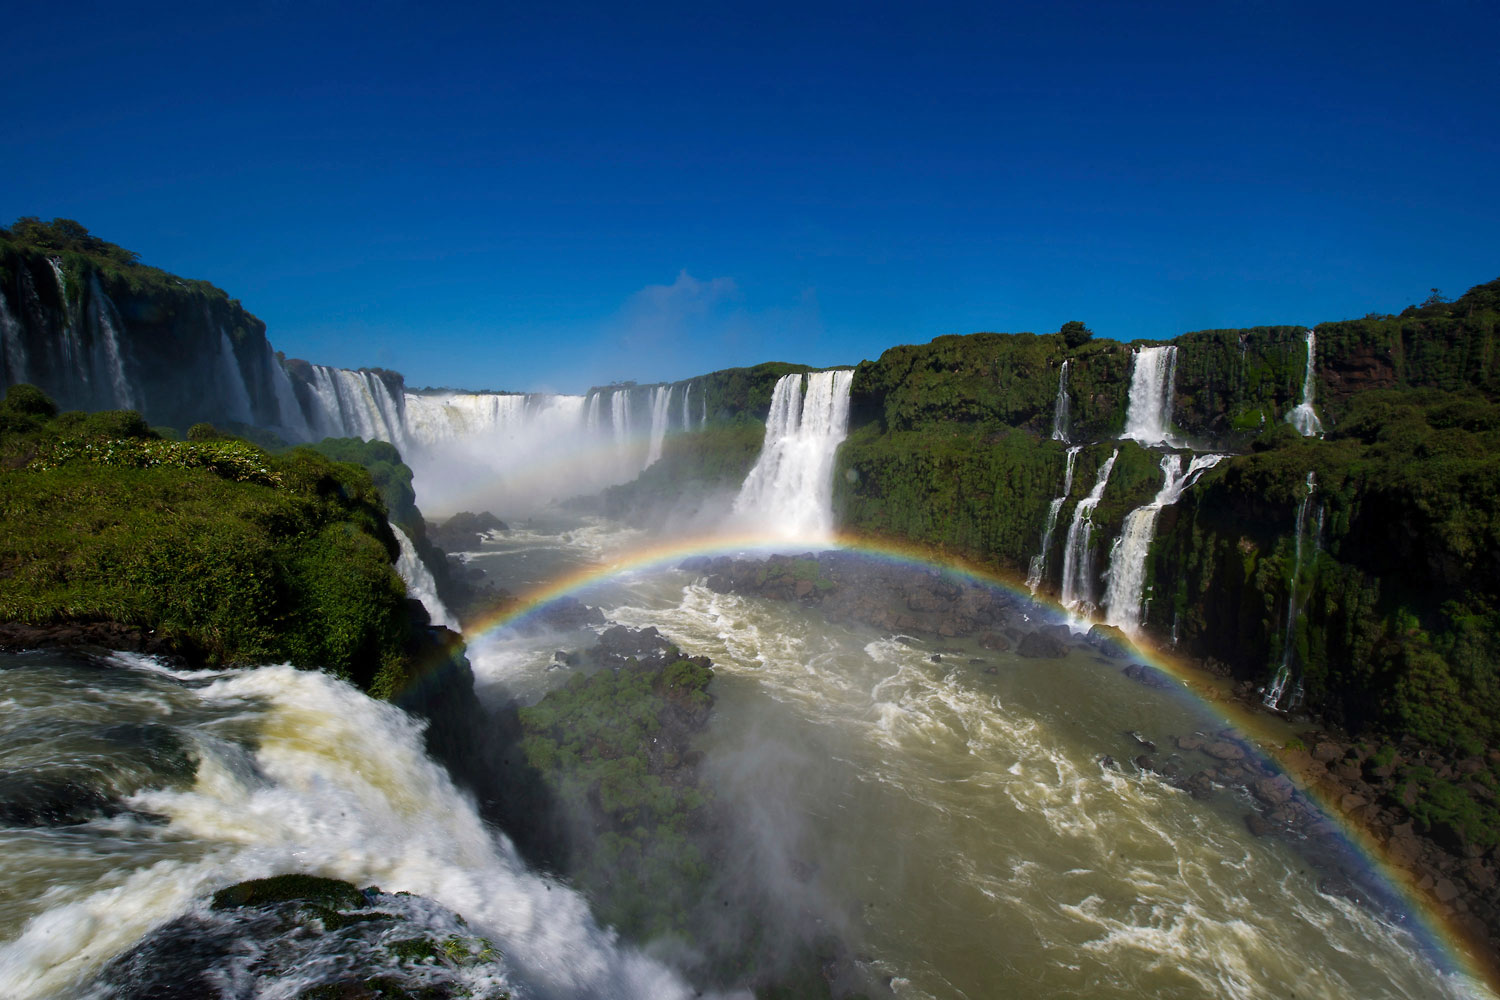 The Iguazu Falls, surrounded by lush forest and exotic wildlife, are a set of nearly 300 waterfalls in the Iguazu River located on the Brazil-Argentina border.